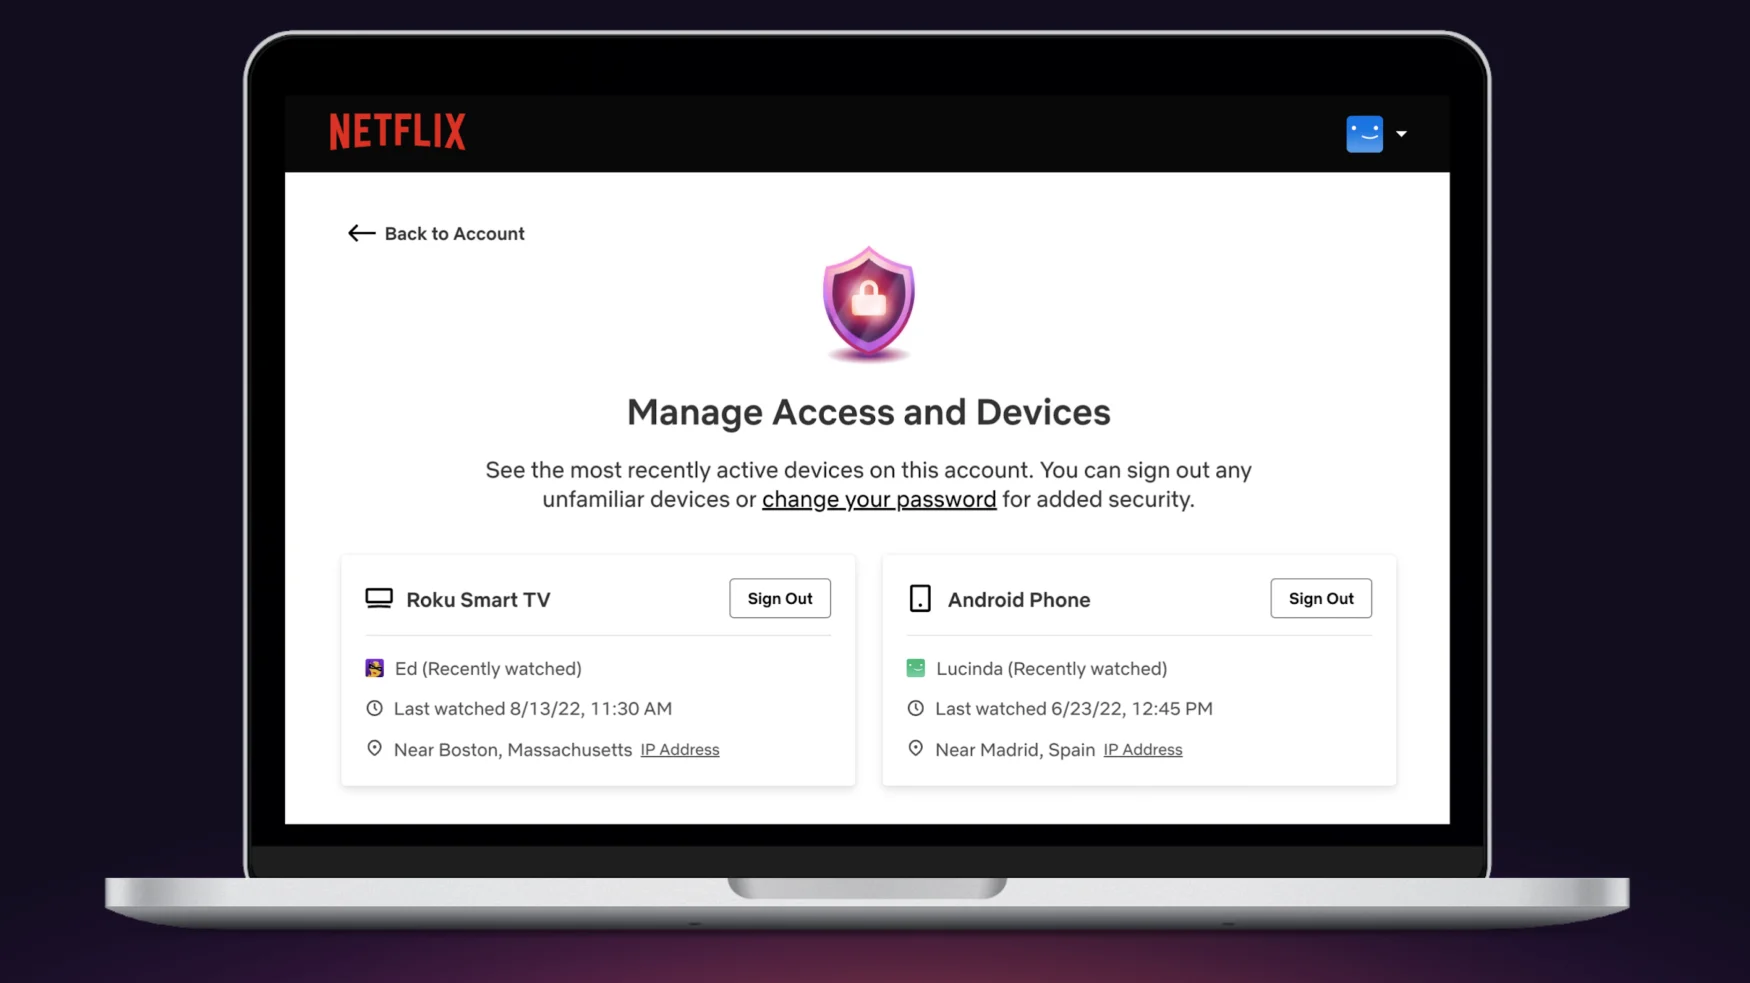 Netflix Manage Access and Devices menu